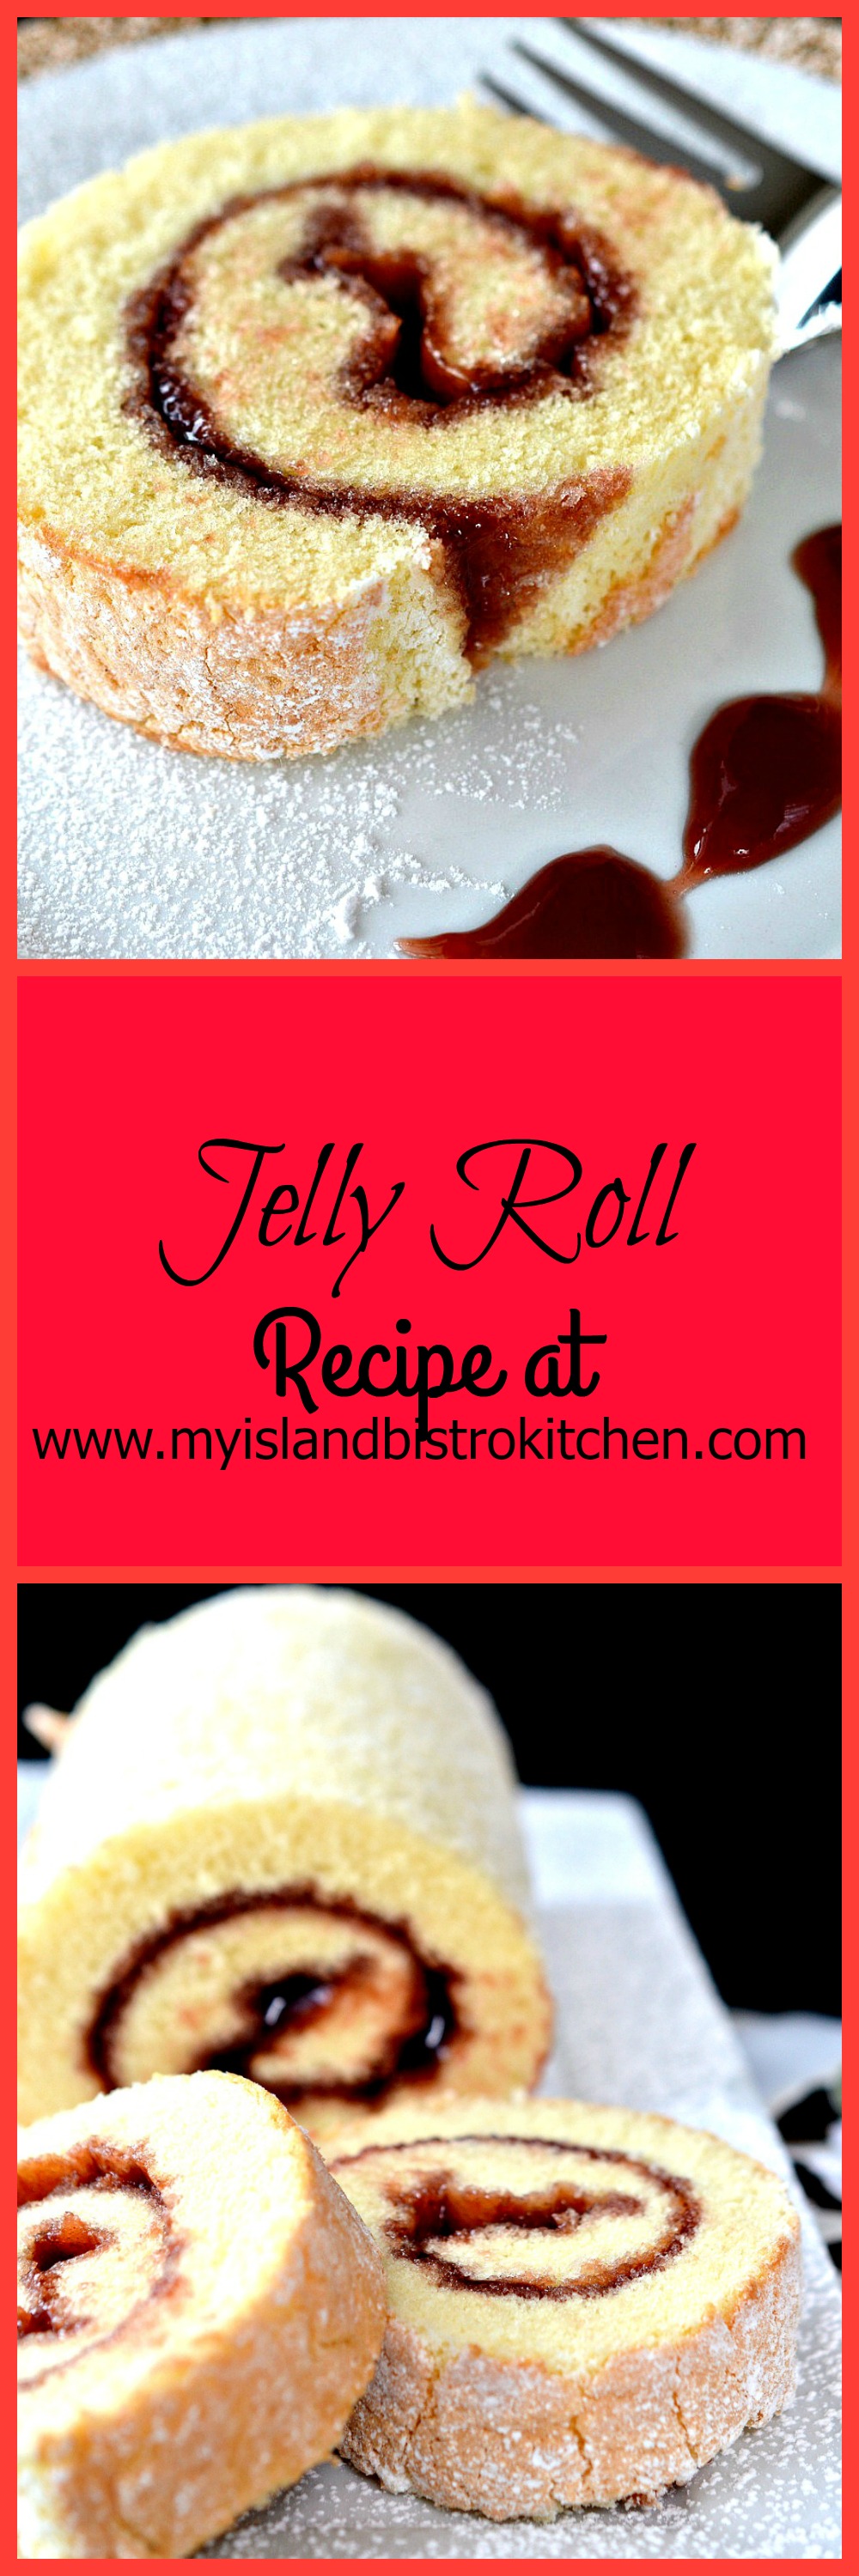 Jelly Roll - Yummy sponge cake with a red jelly/jam filling